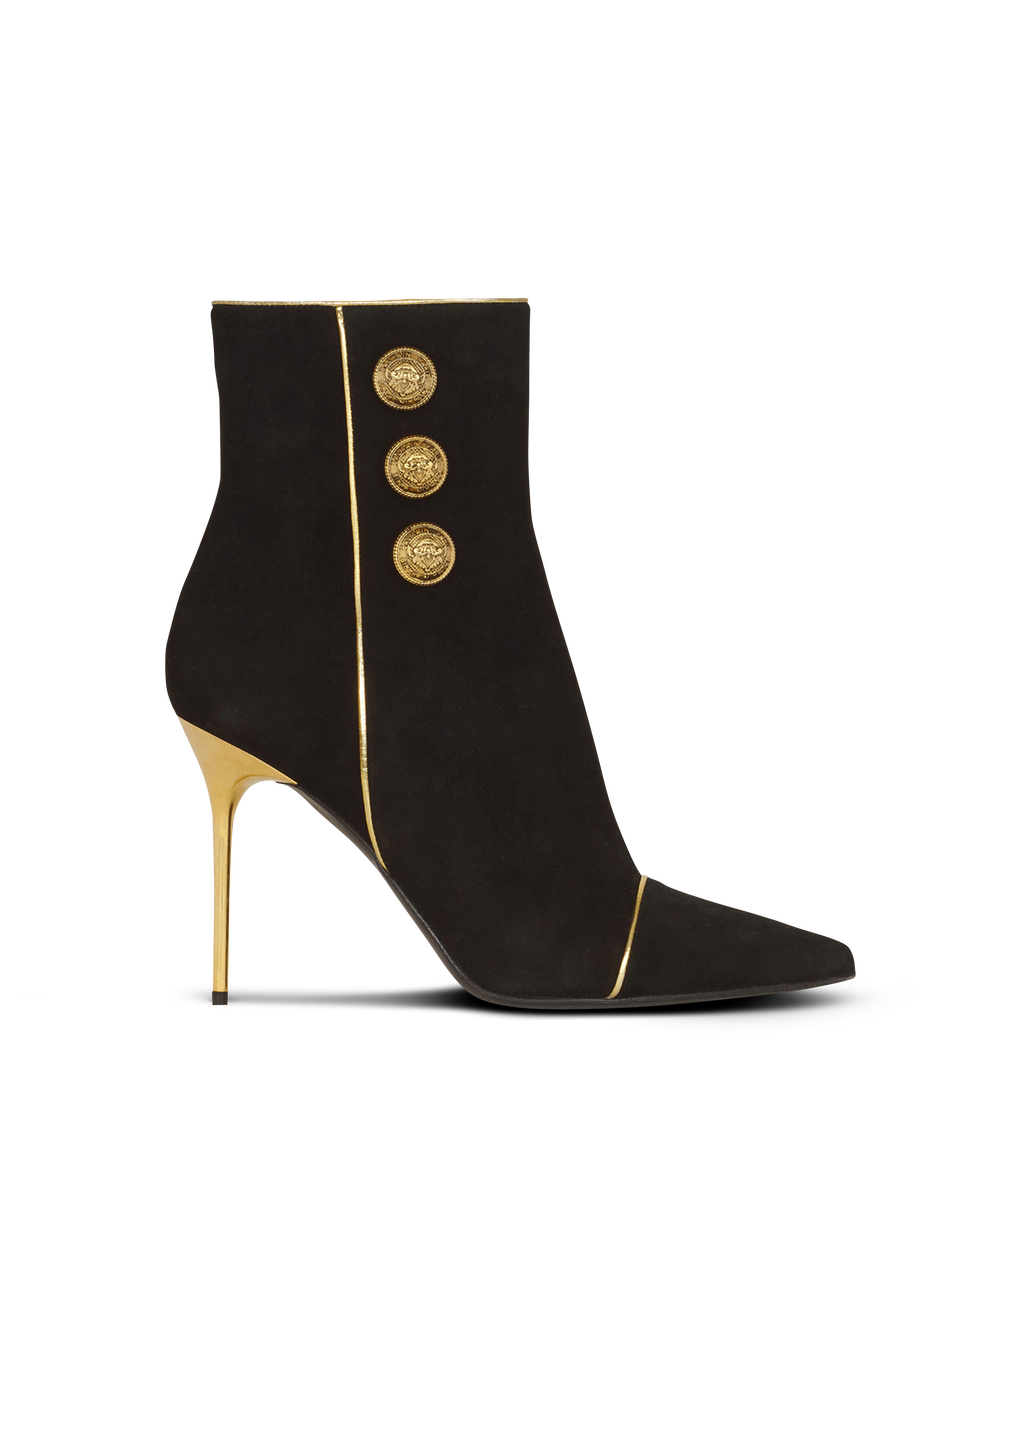 Suede Roni ankle boots, black, hi-res